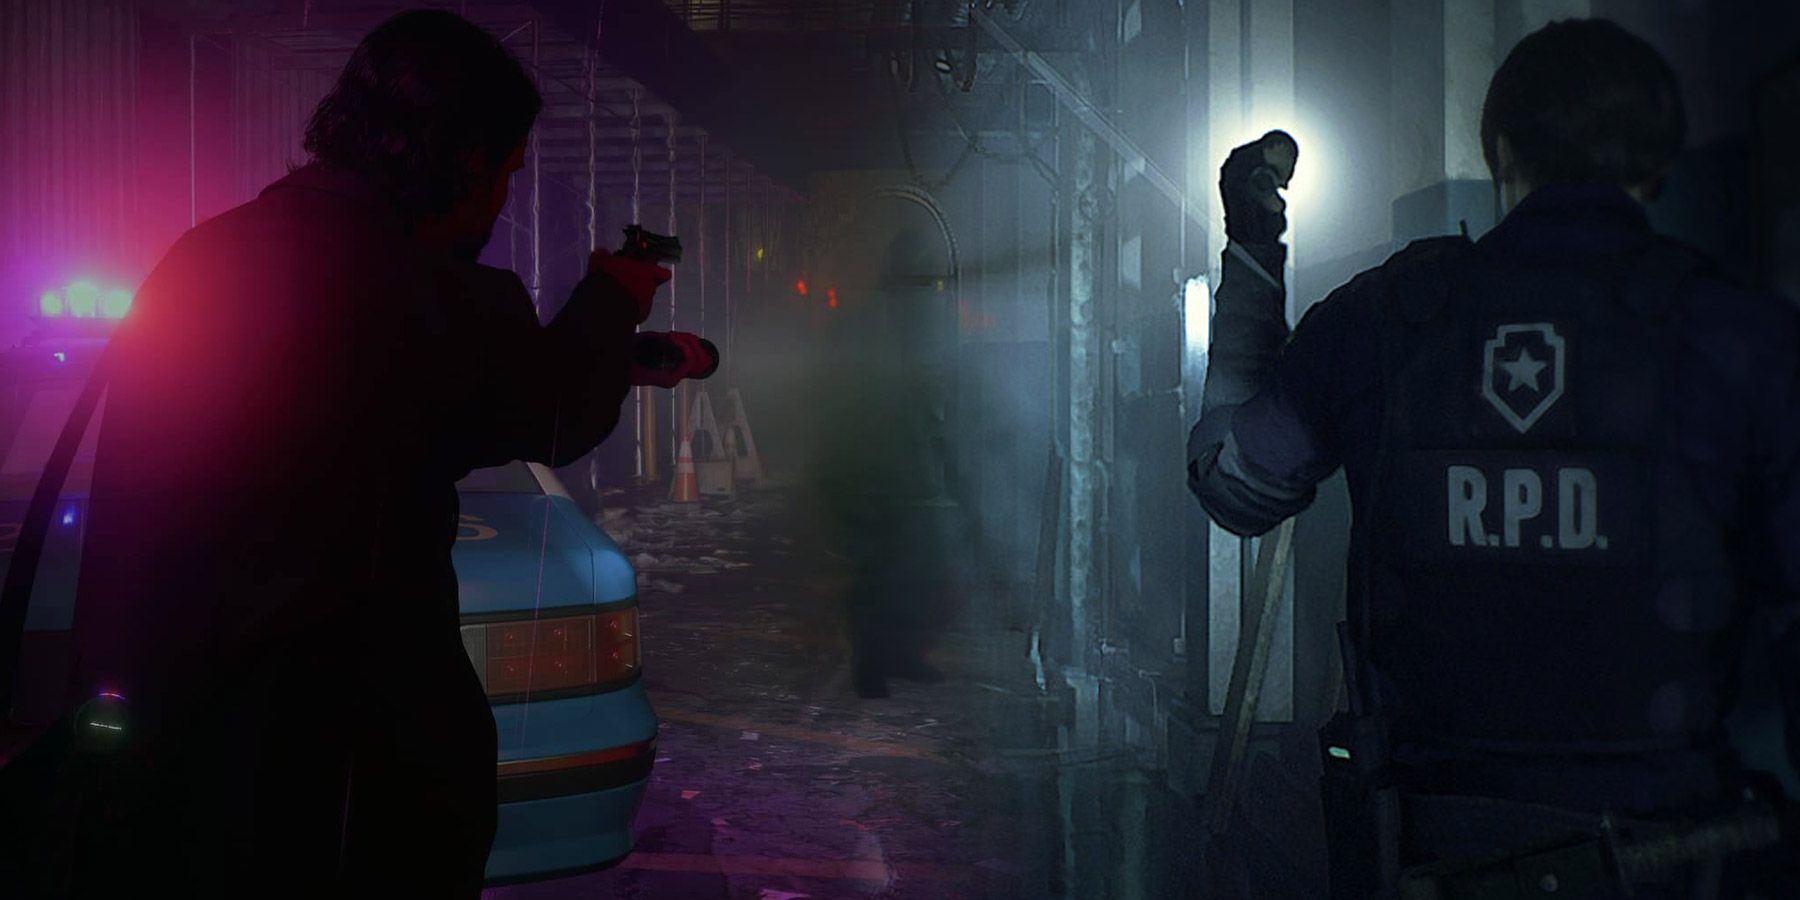 Alan Wake 2 took influence from Resident Evil to make players feel